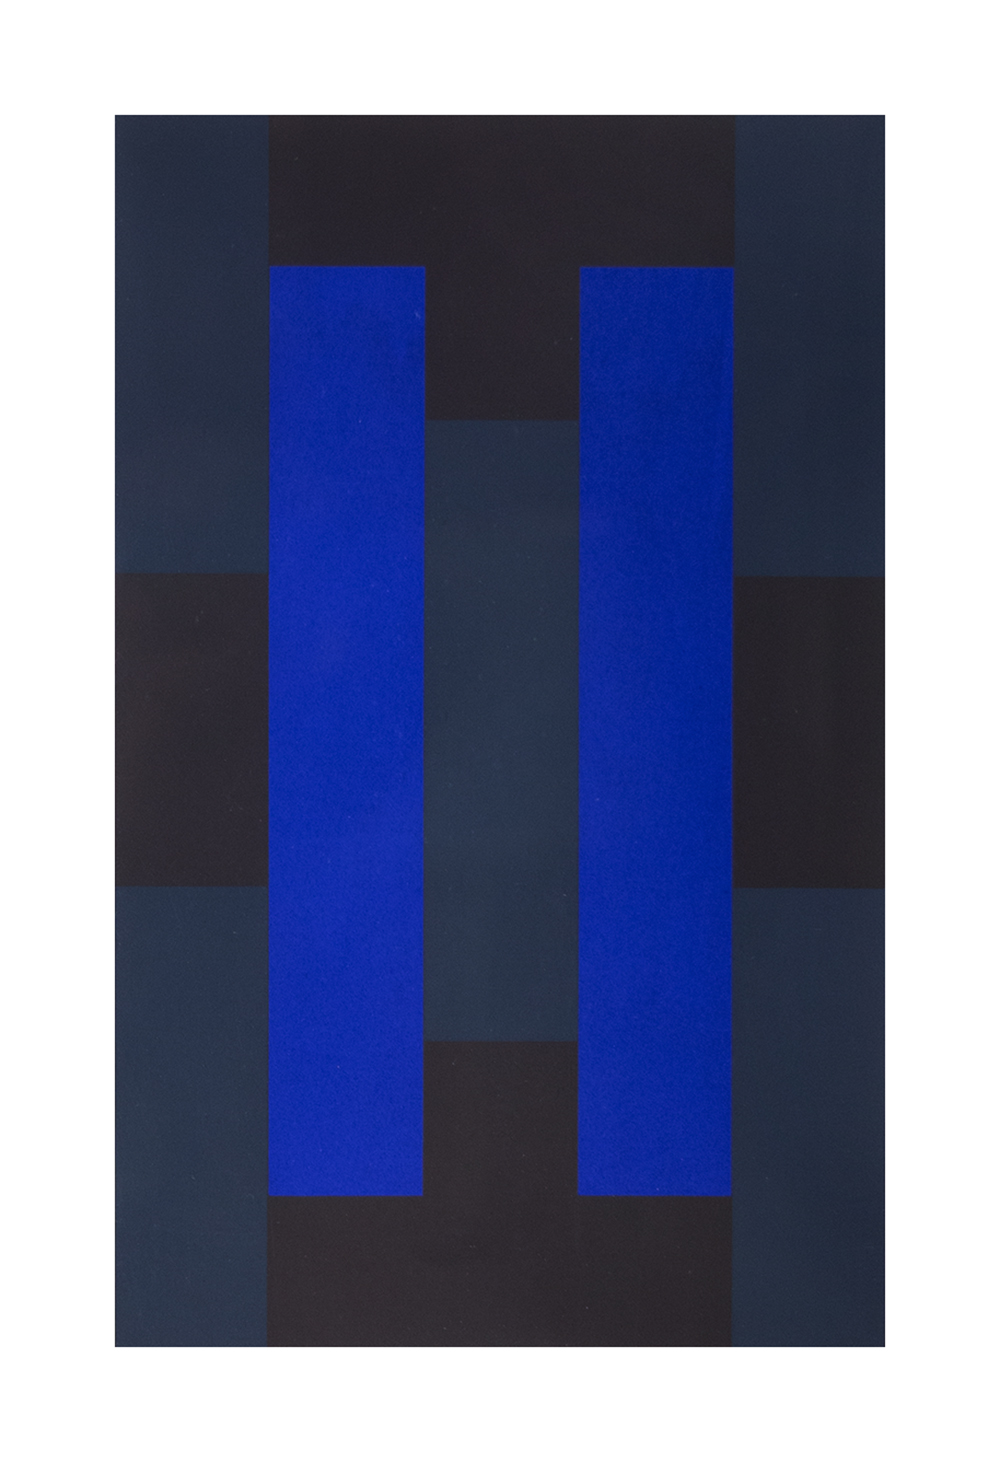 Black square another, screenprint on paper 2 works by Ad Reinhardt